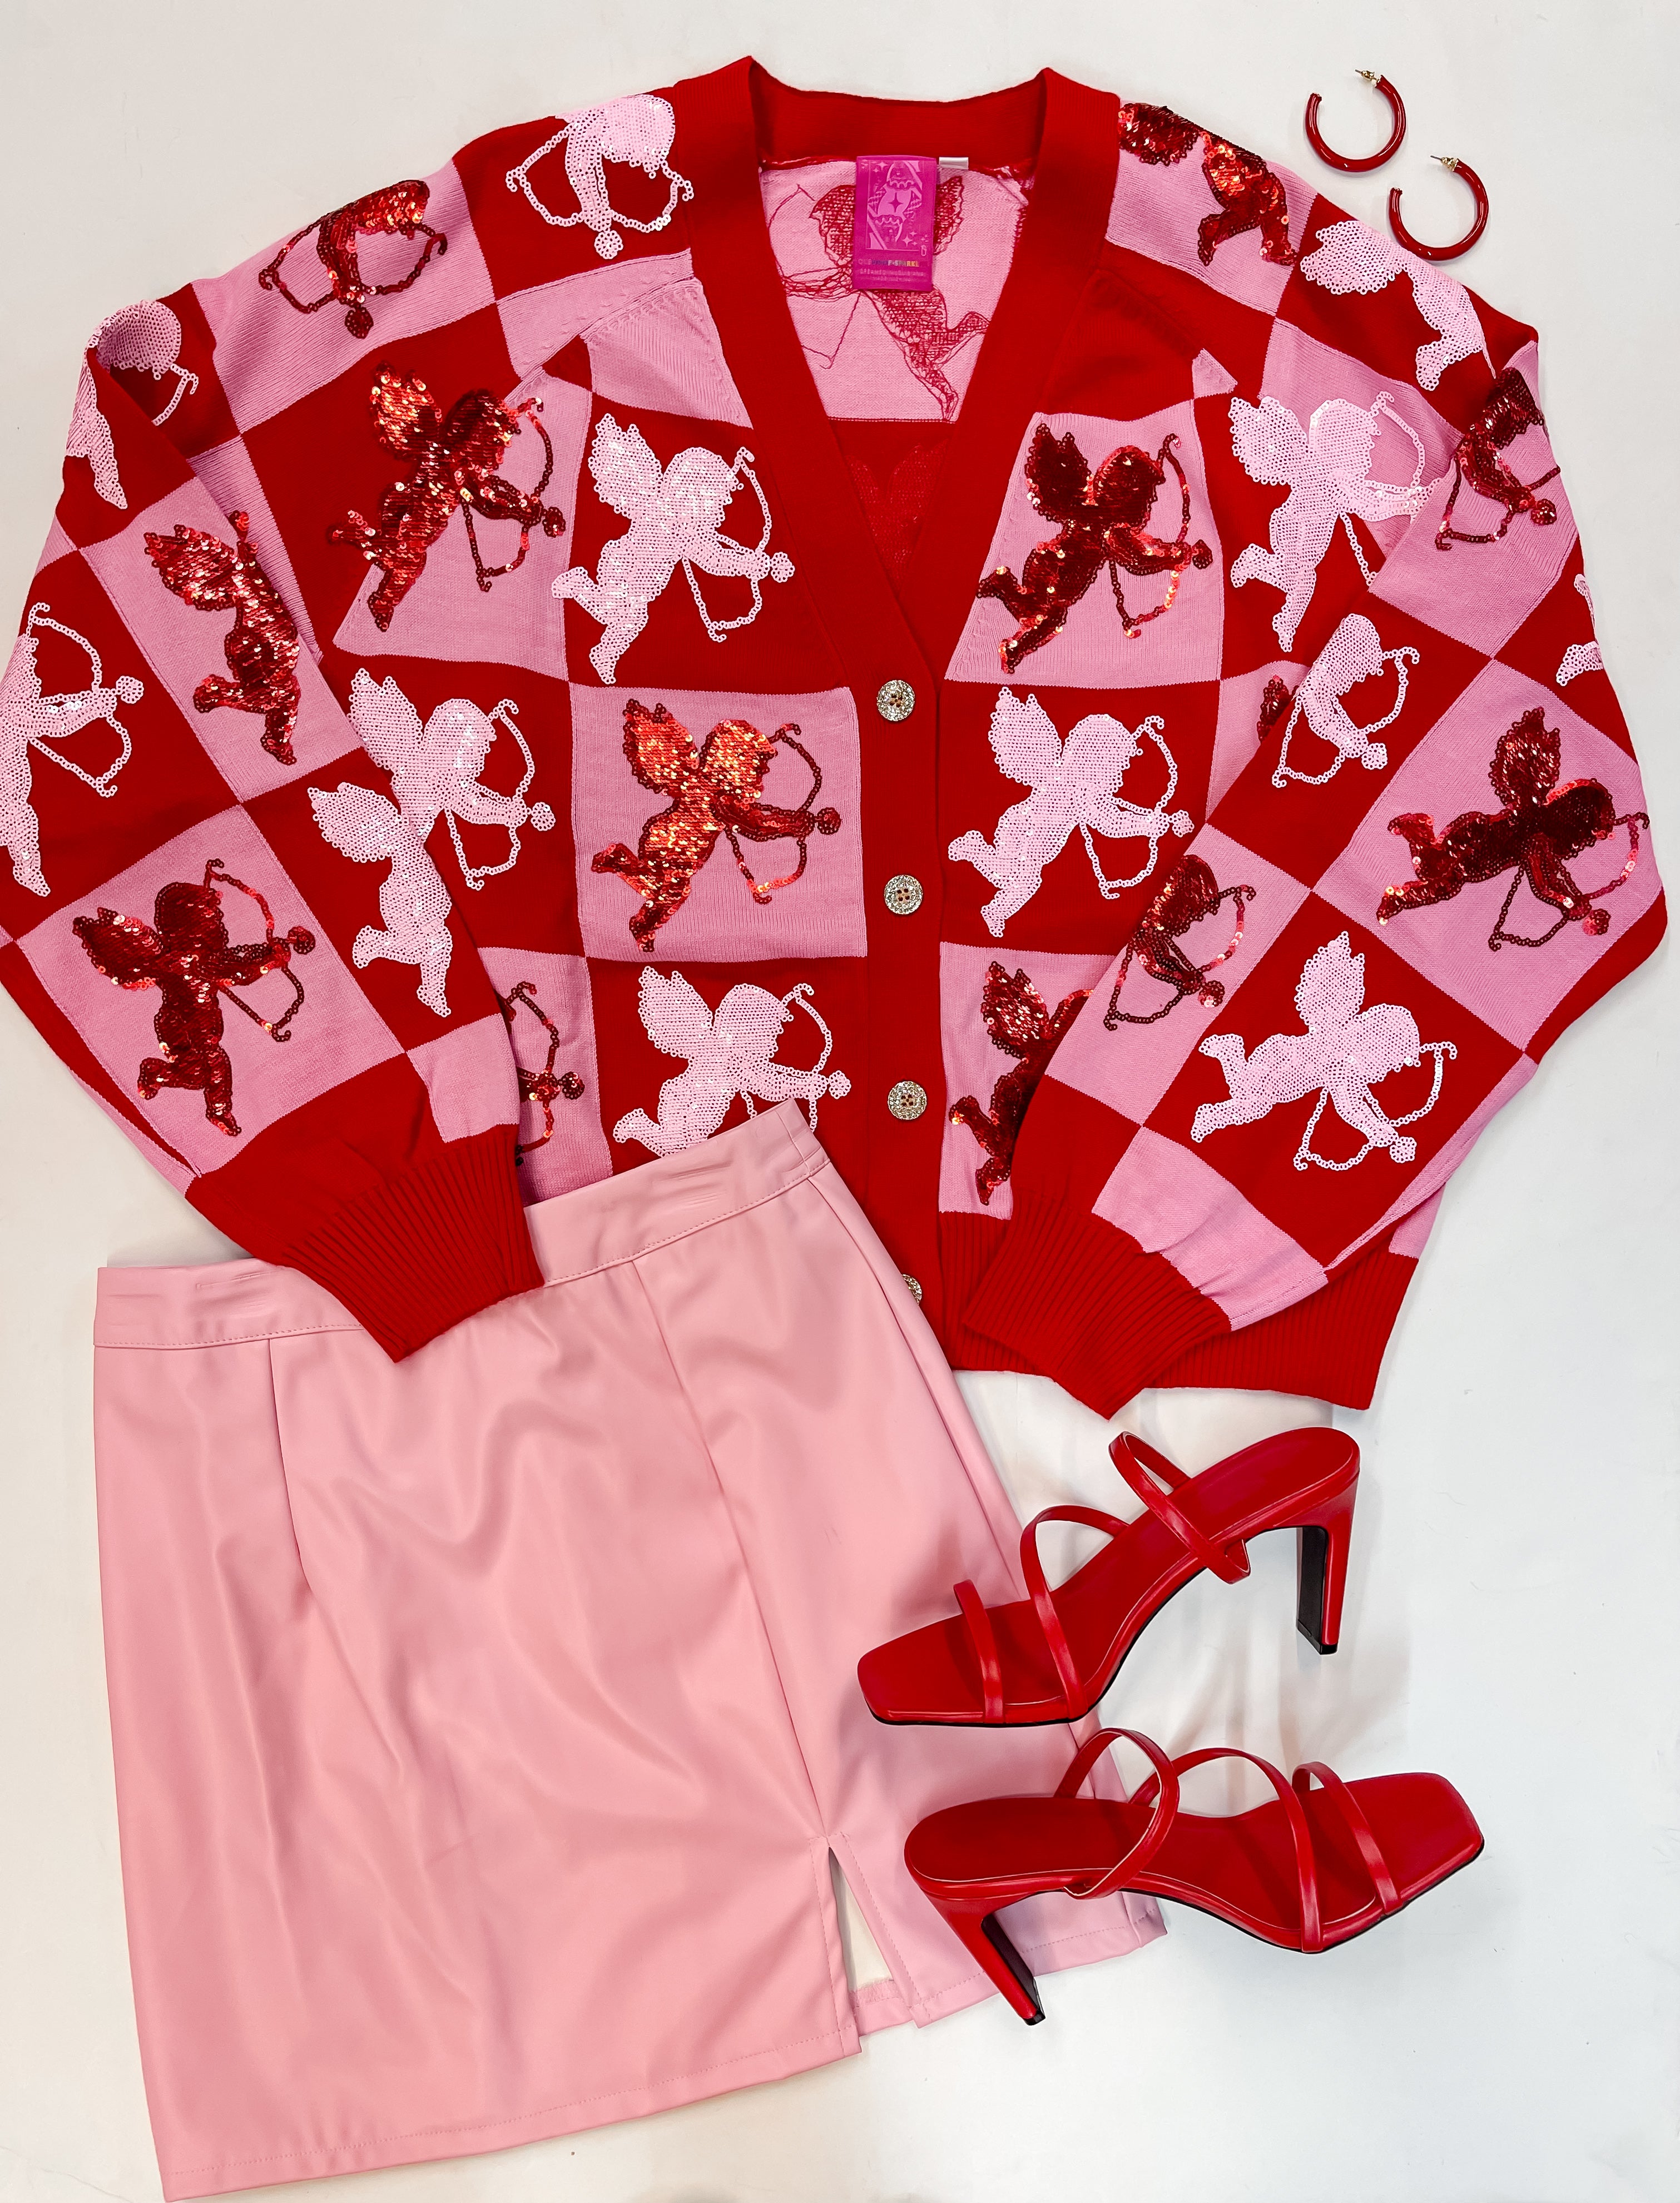 Queen Of Sparkles | Love Struck Fully Sequin Checkered Cardigan in Red and Pink - Giddy Up Glamour Boutique